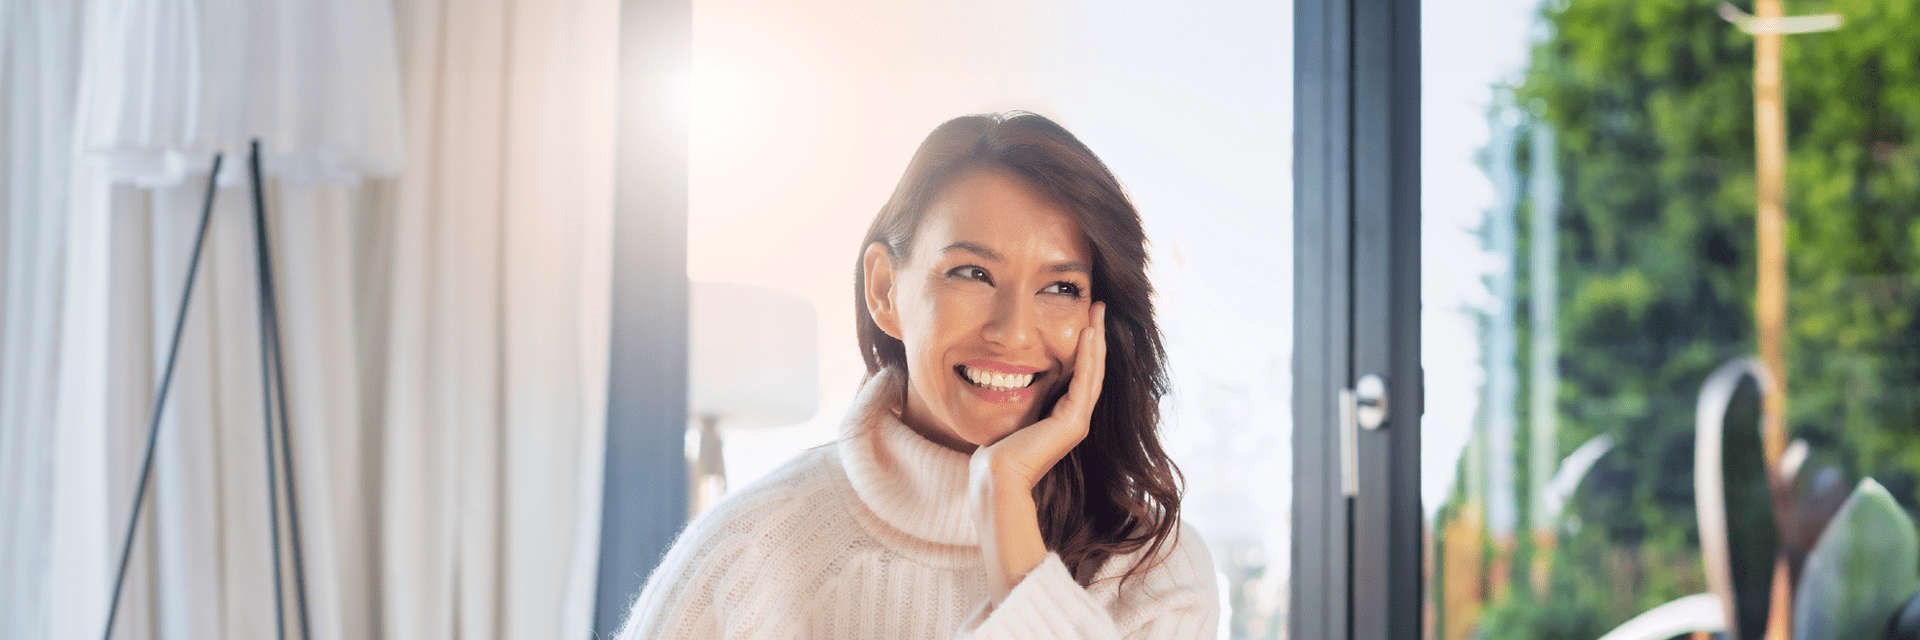 Woman in cream jumper smiling with glowing skin